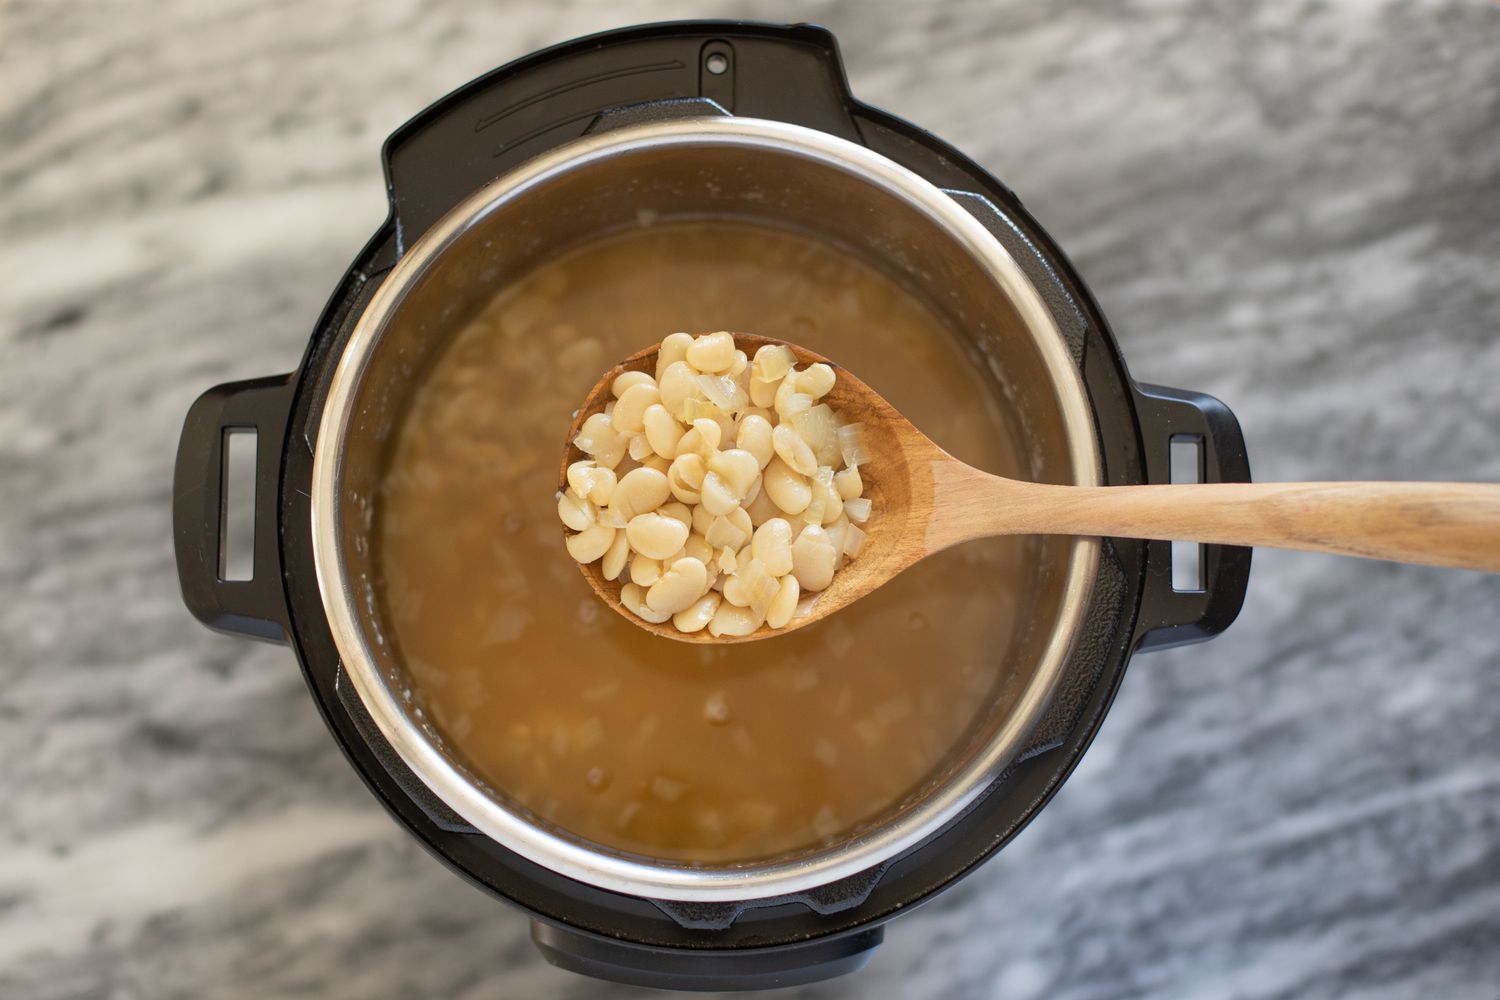 How To Cook Lima Beans In An Electric Pressure Cooker